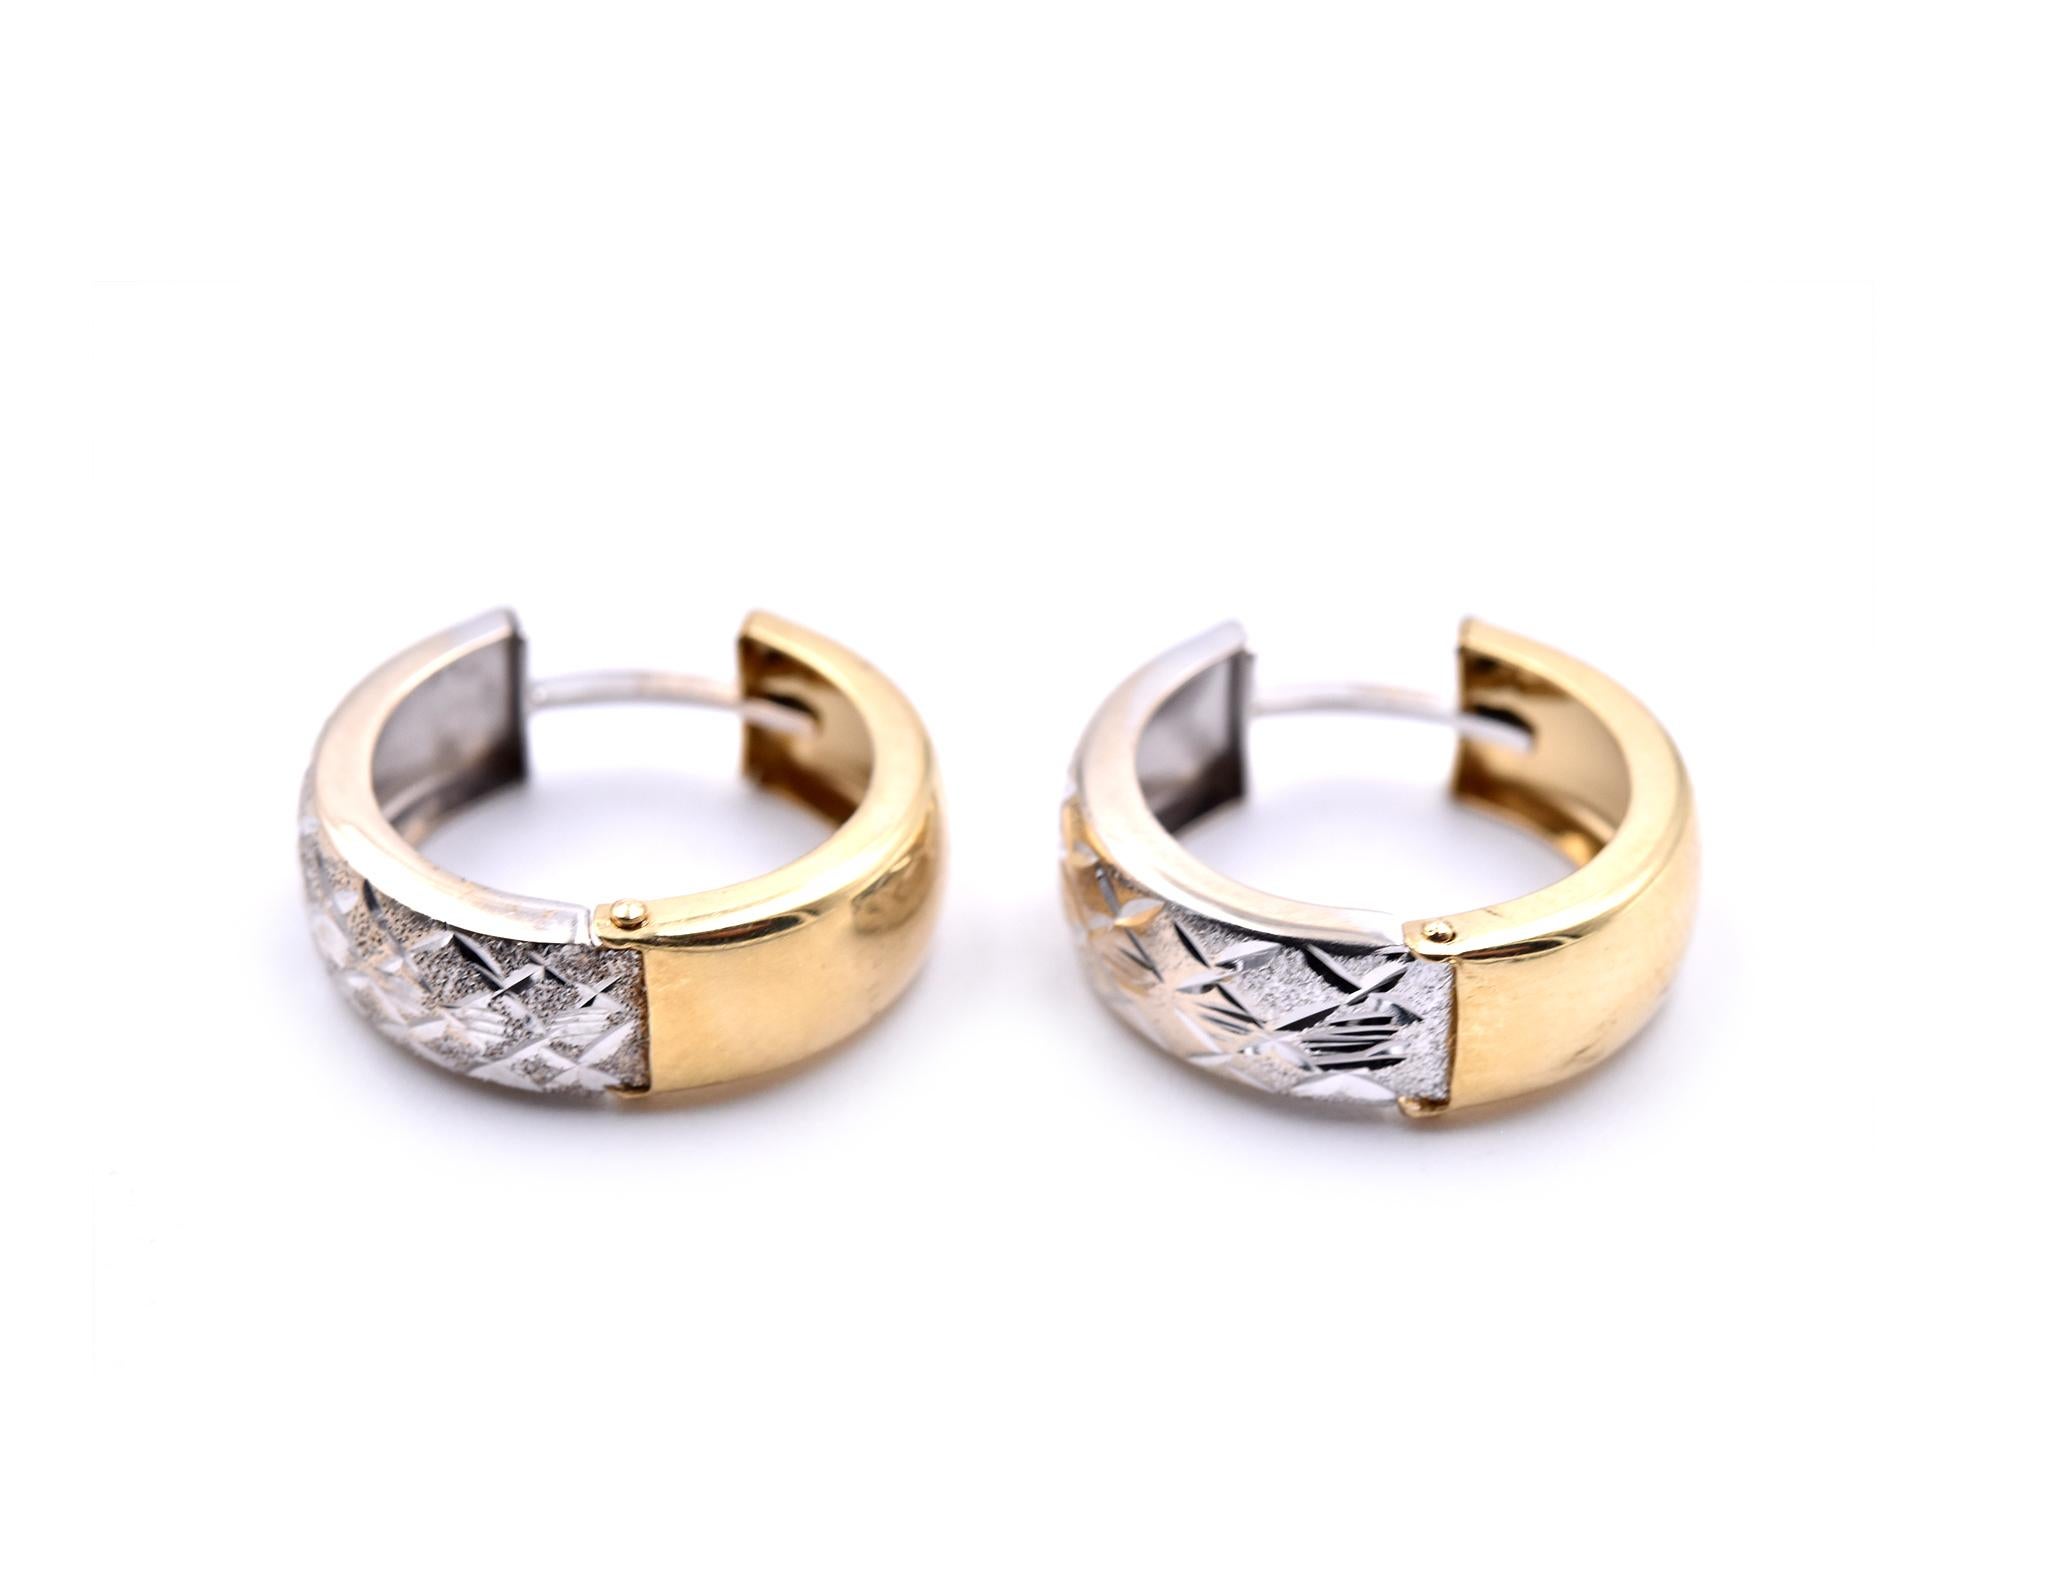 Designer: custom design
Material: 14k yellow and white gold
Dimensions: earrings are 14.48mm by 16.75mm
Fastenings: huggie
Weight: 2.12 grams
